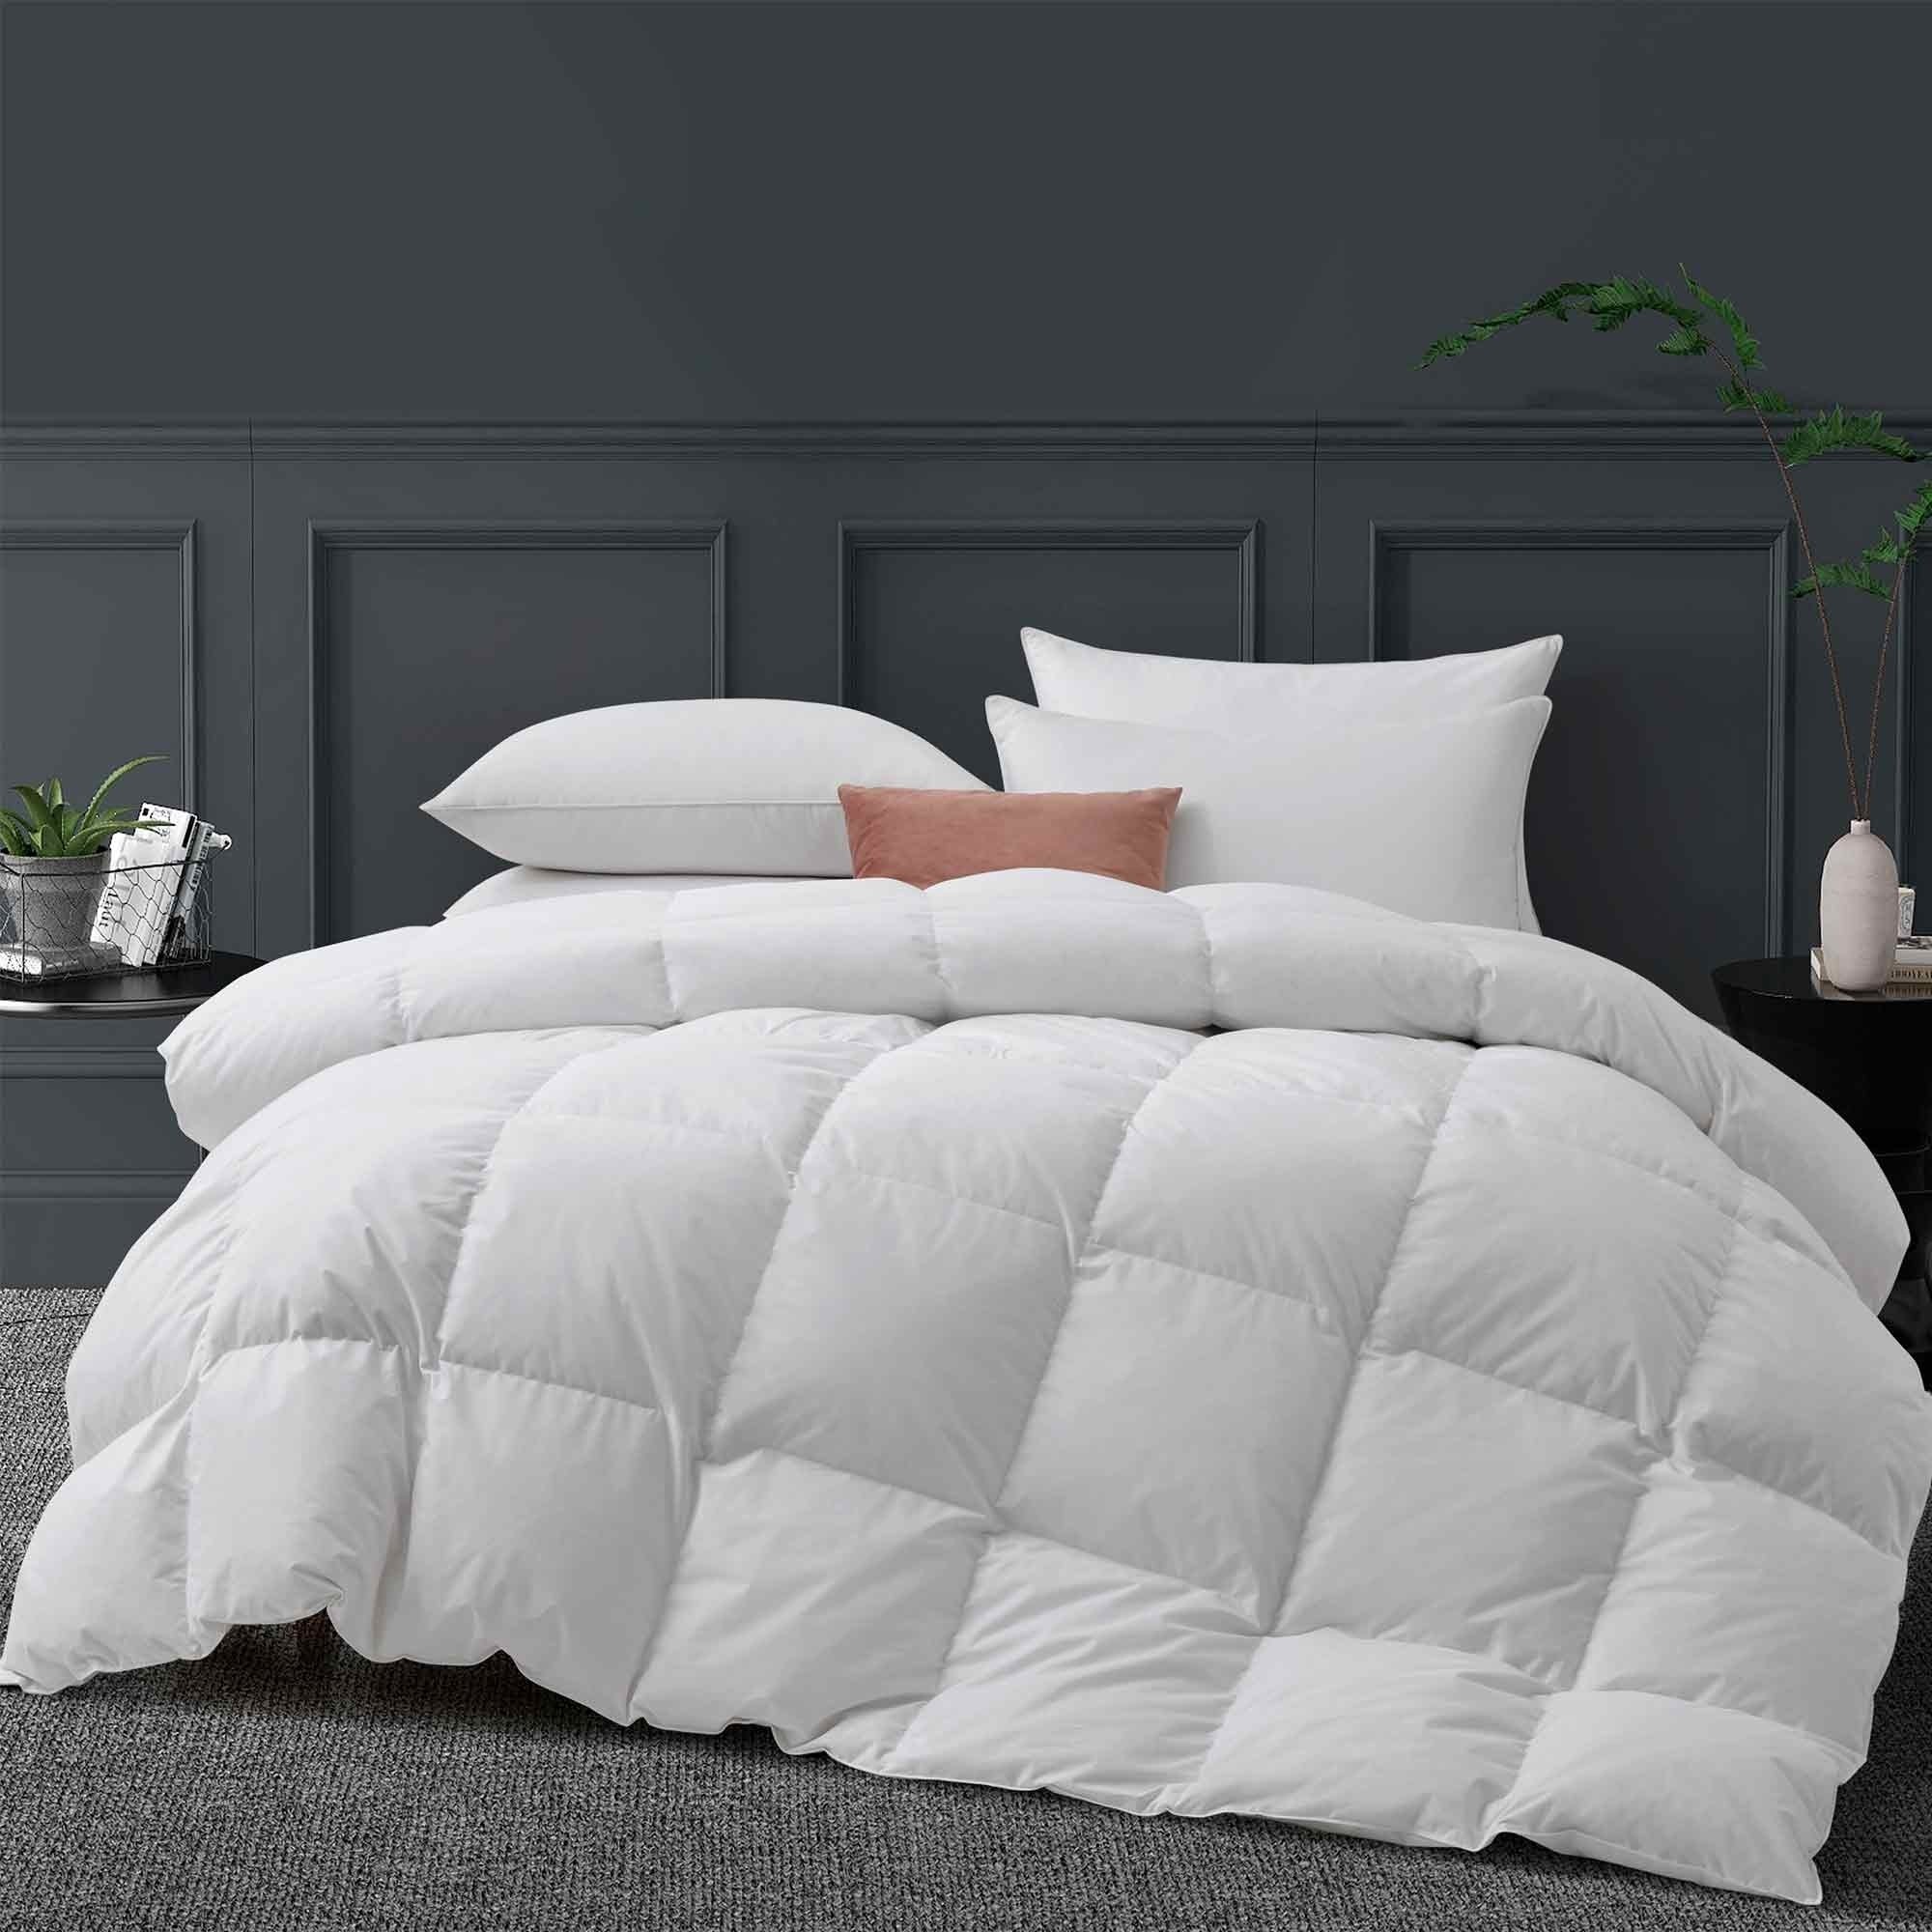 White Goose Feather And Down Comforters, Lightweight And Medium Weight Duvet Insert - Lightweight, King